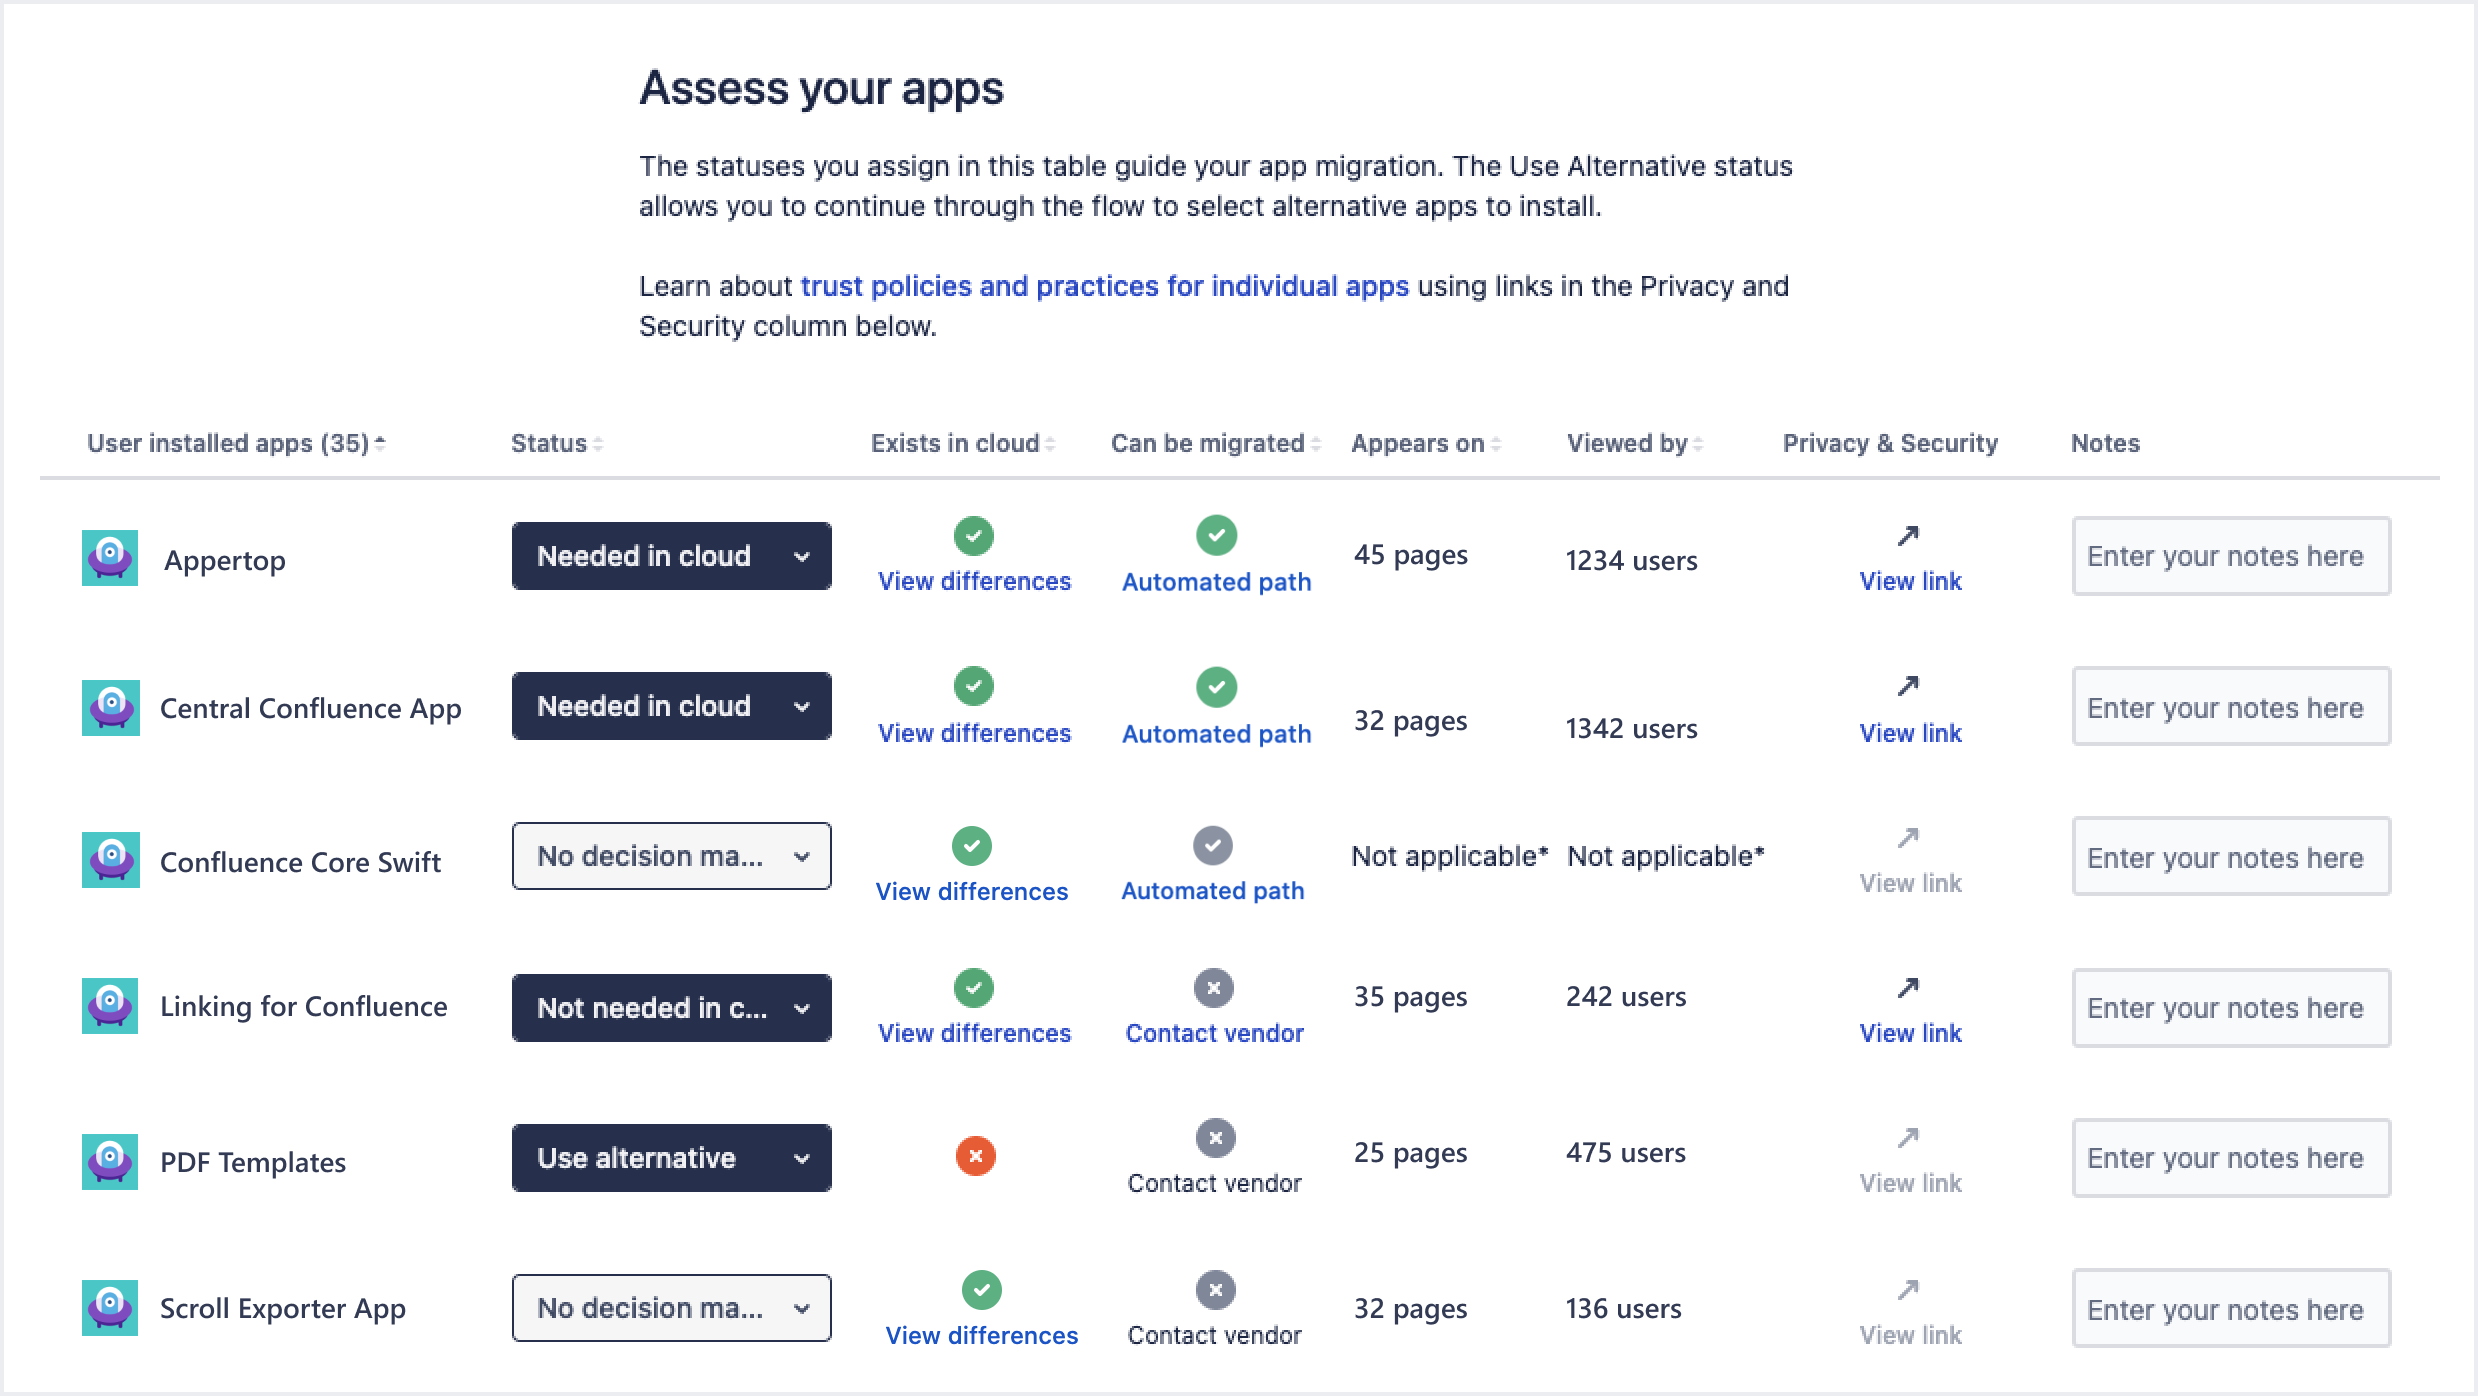 Assess your apps screen